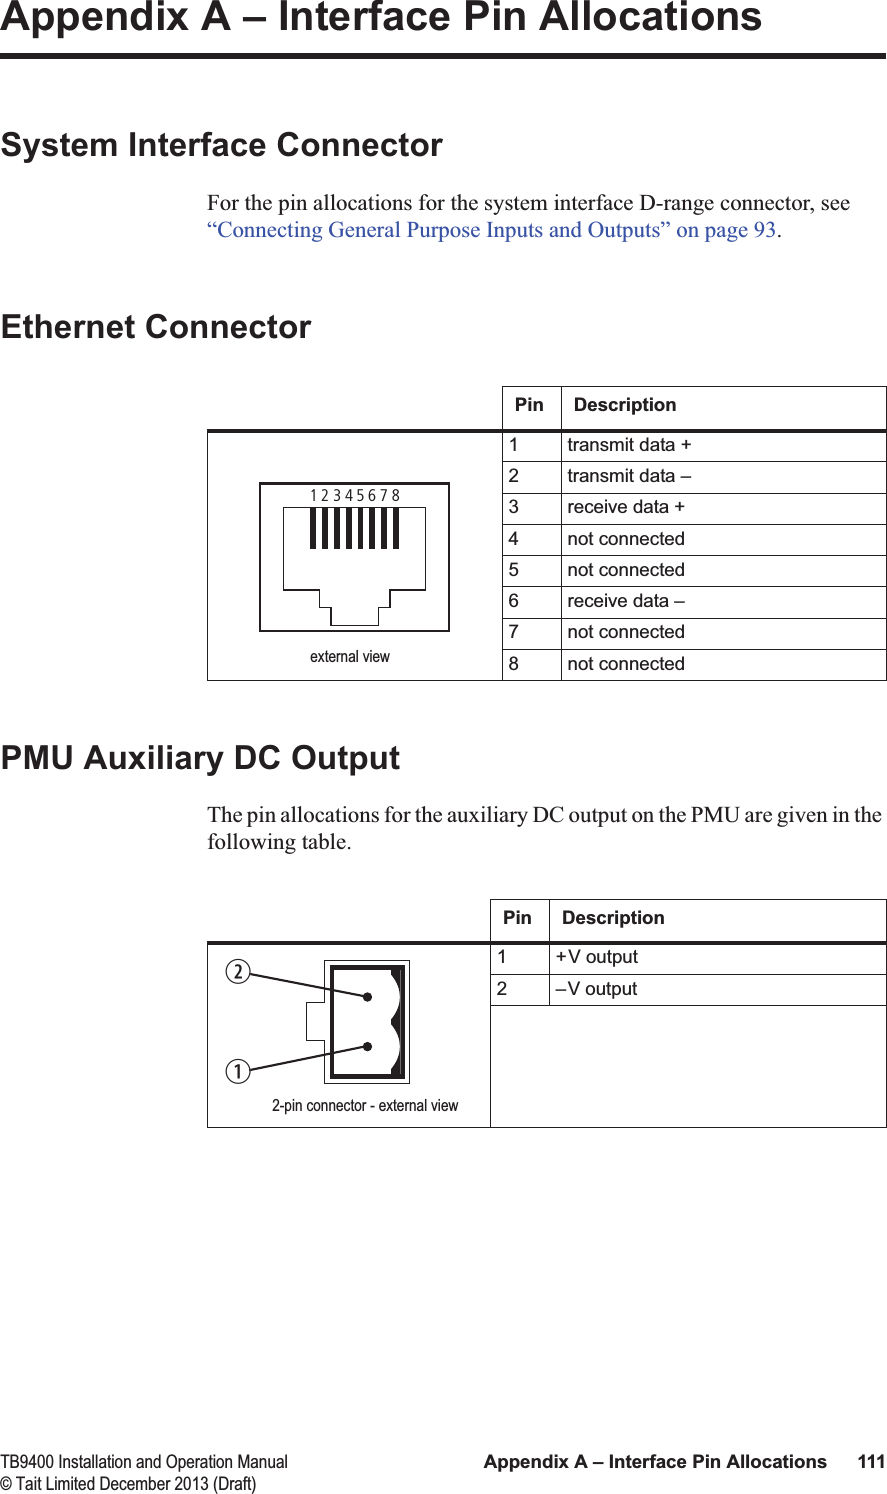  TB9400 Installation and Operation Manual Appendix A – Interface Pin Allocations 111© Tait Limited December 2013 (Draft)Appendix A – Interface Pin AllocationsSystem Interface ConnectorFor the pin allocations for the system interface D-range connector, see “Connecting General Purpose Inputs and Outputs” on page 93.Ethernet ConnectorPMU Auxiliary DC OutputThe pin allocations for the auxiliary DC output on the PMU are given in the following table.Pin Description1 transmit data +2 transmit data –3 receive data +4 not connected5 not connected6 receive data –7 not connected8 not connected12345678external viewPin Description1 +V output2 –V output2-pin connector - external viewbc